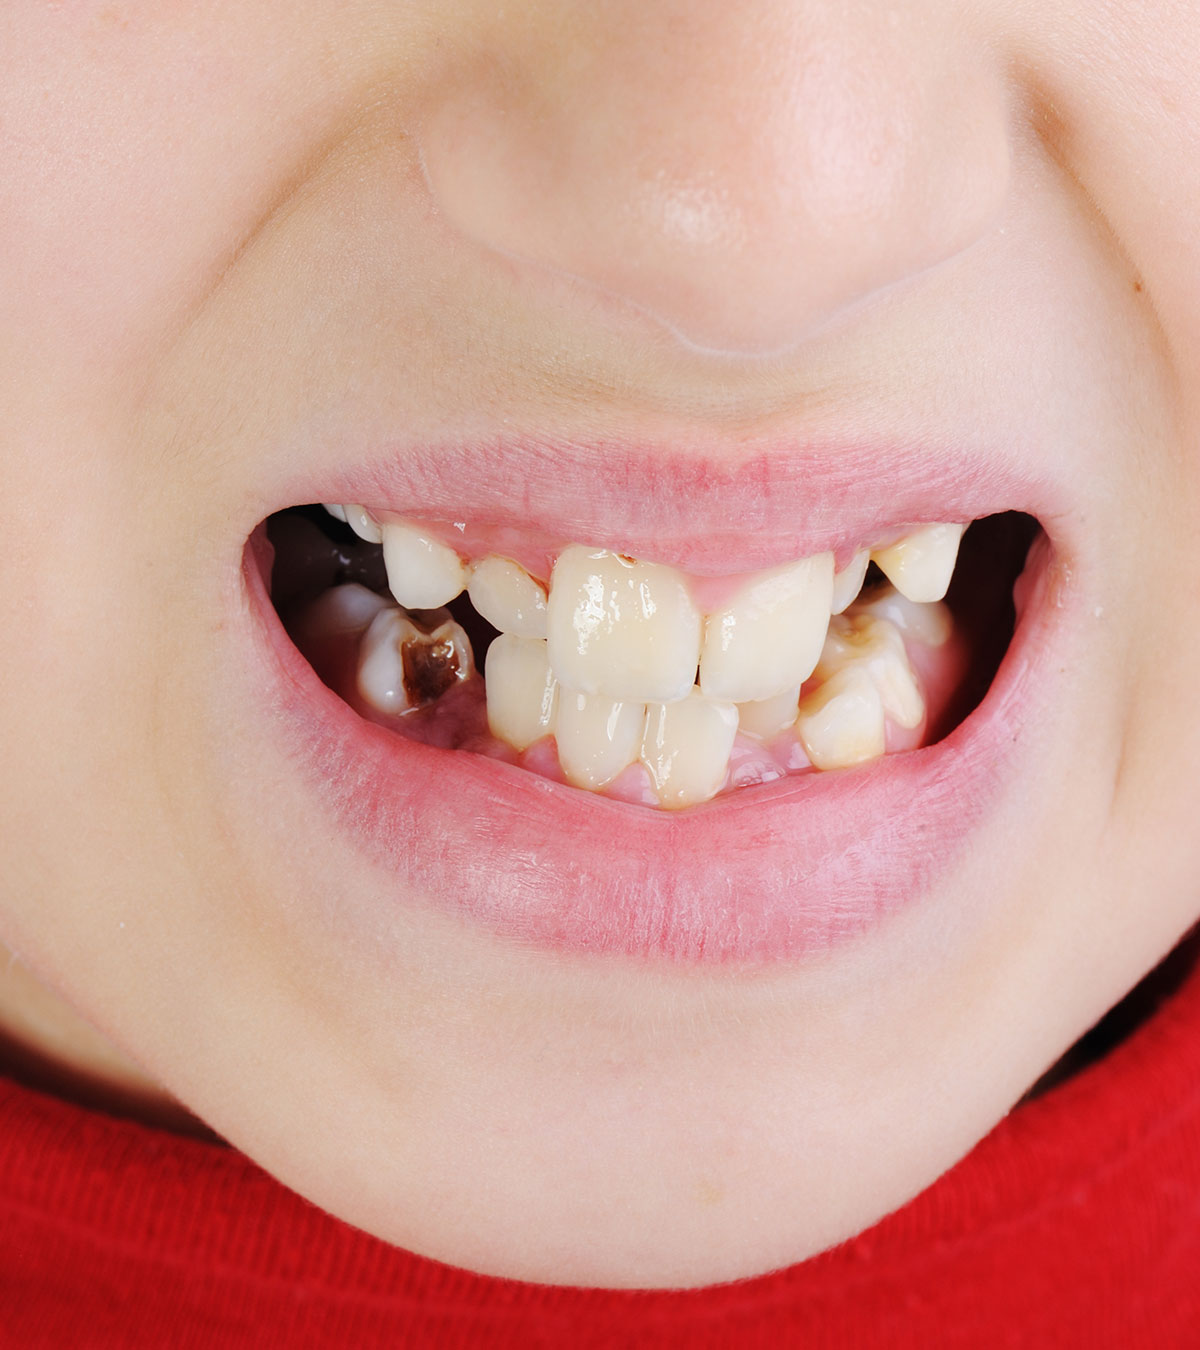 Discolored Teeth In Child: Causes, Treatment, Remedies And Prevention